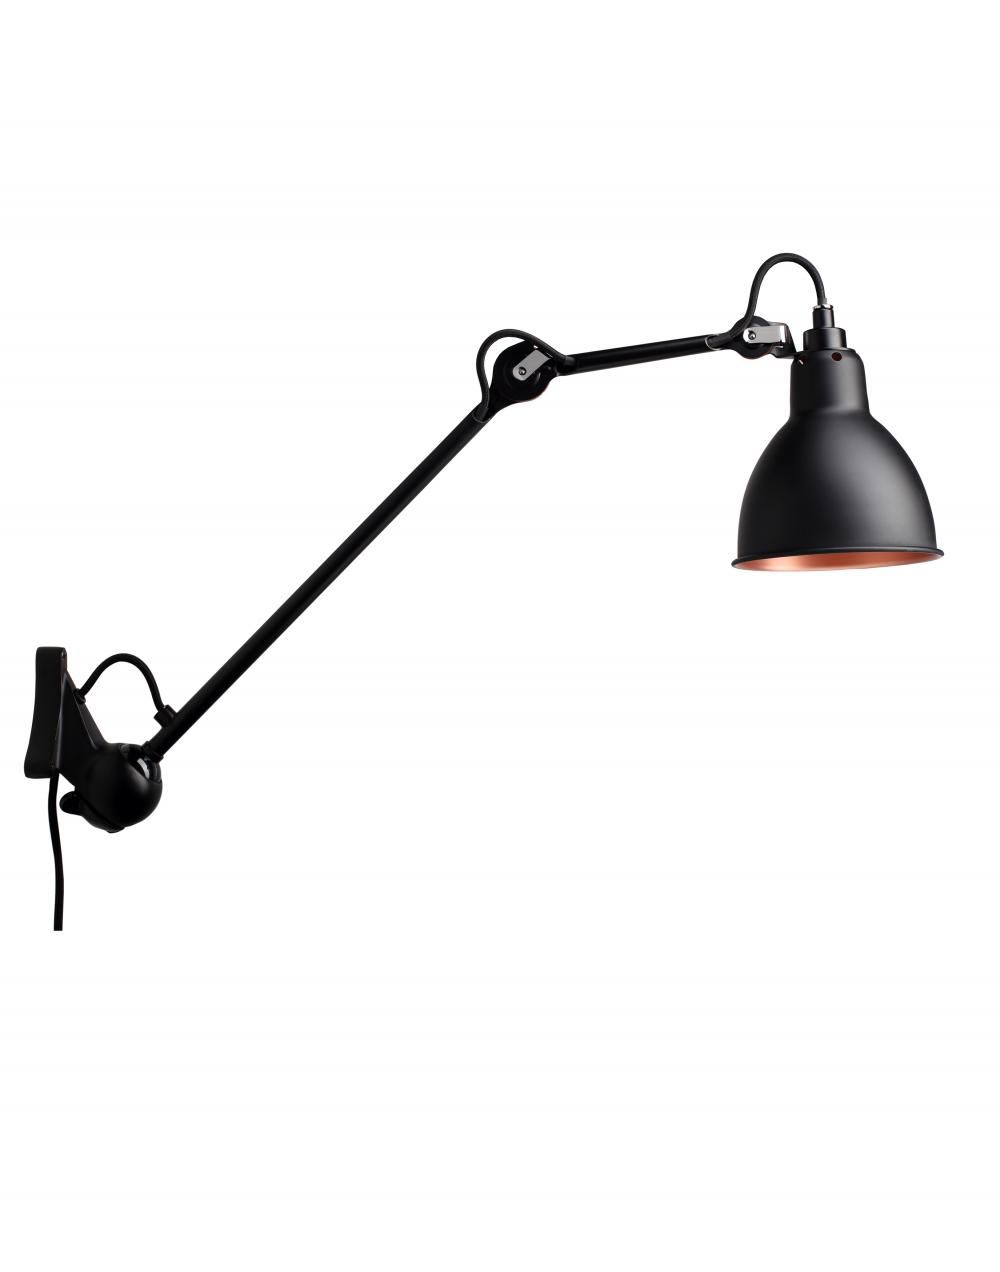 Lampe Gras 222 Wall Light Black Arm Black Shade With Copper Interior Round Shade